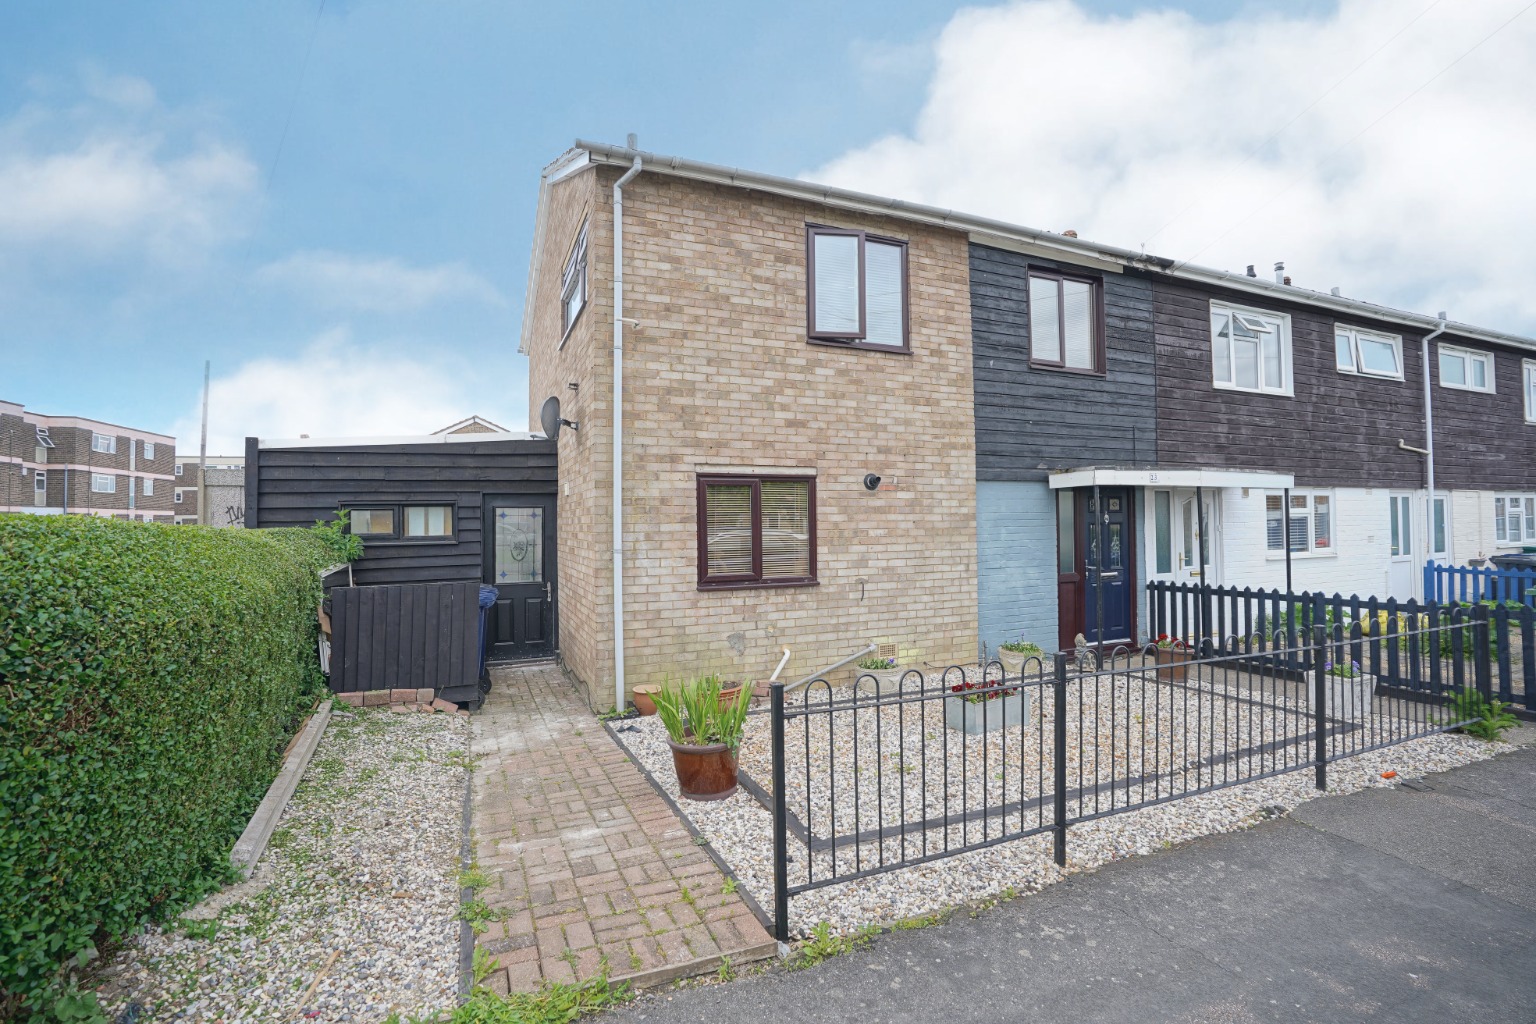 3 bed terraced house for sale in Wintringham Road, St. Neots - Property Image 1